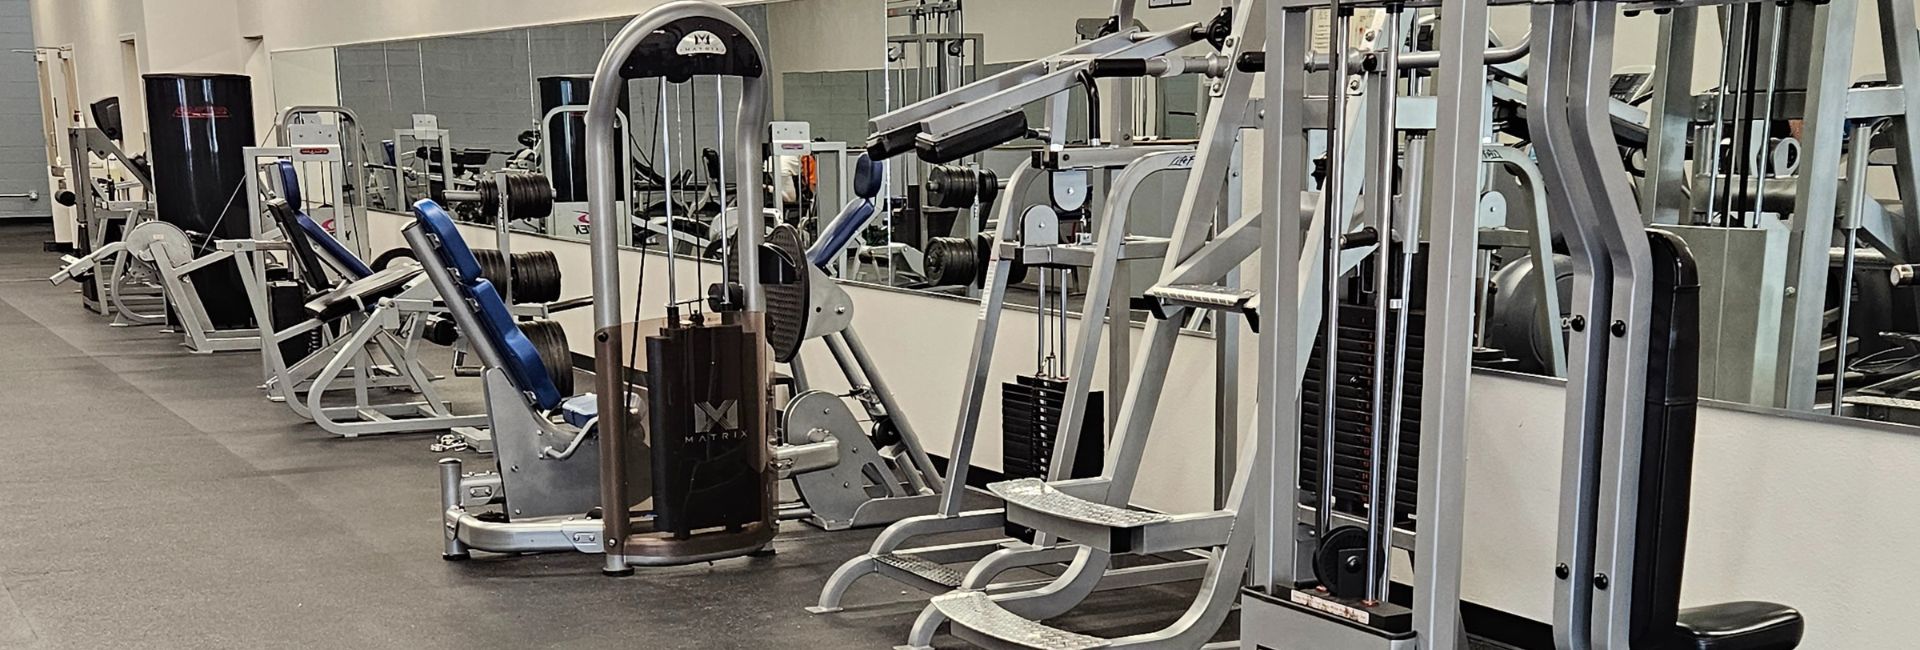 training equipment lined up at a gym near me